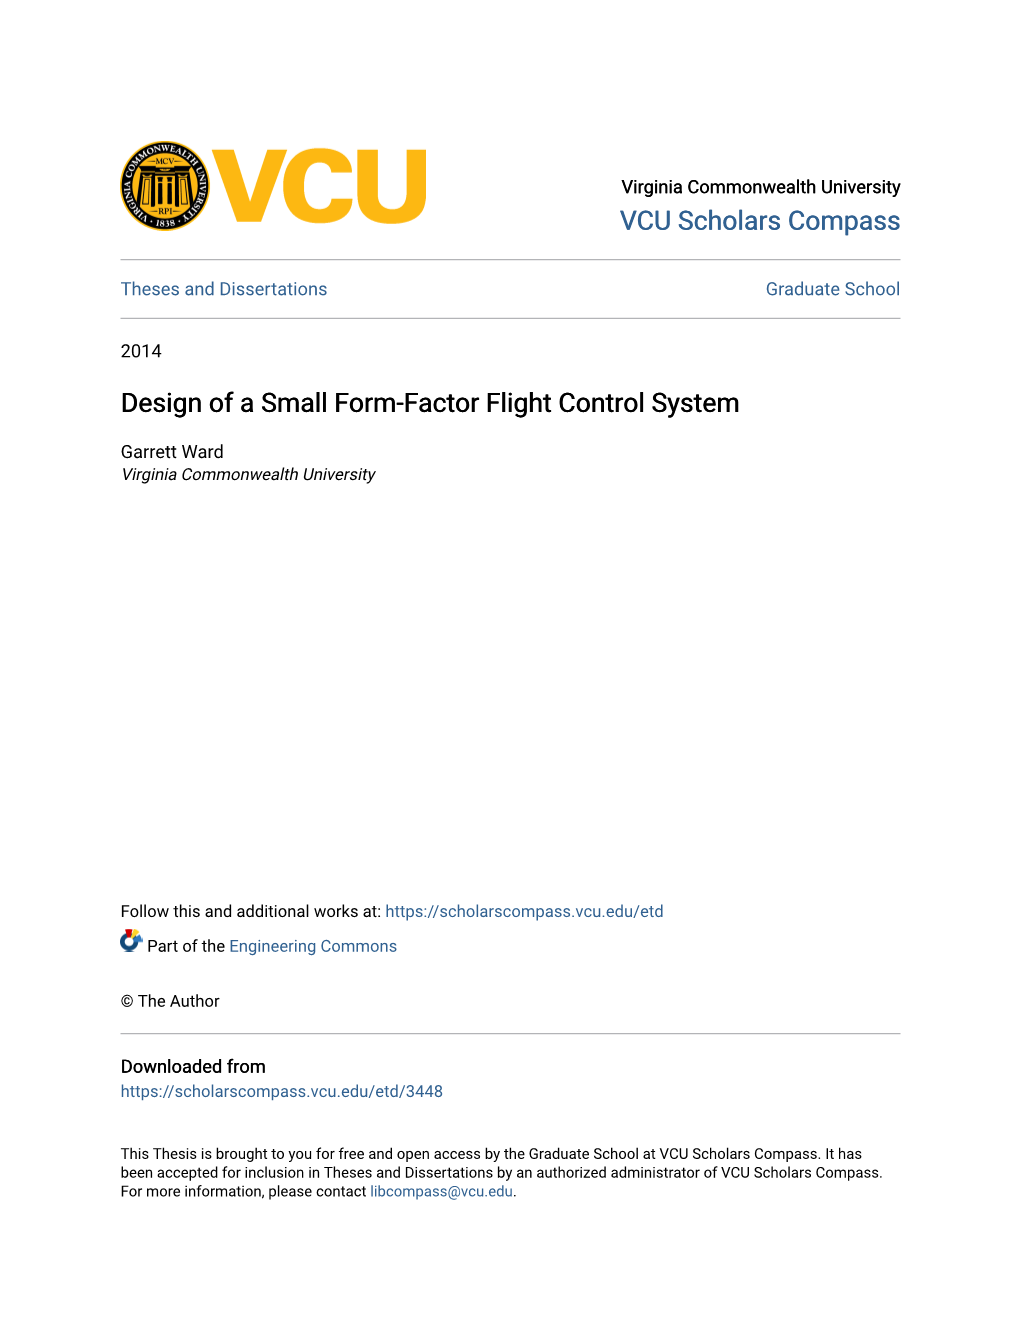 Design of a Small Form-Factor Flight Control System